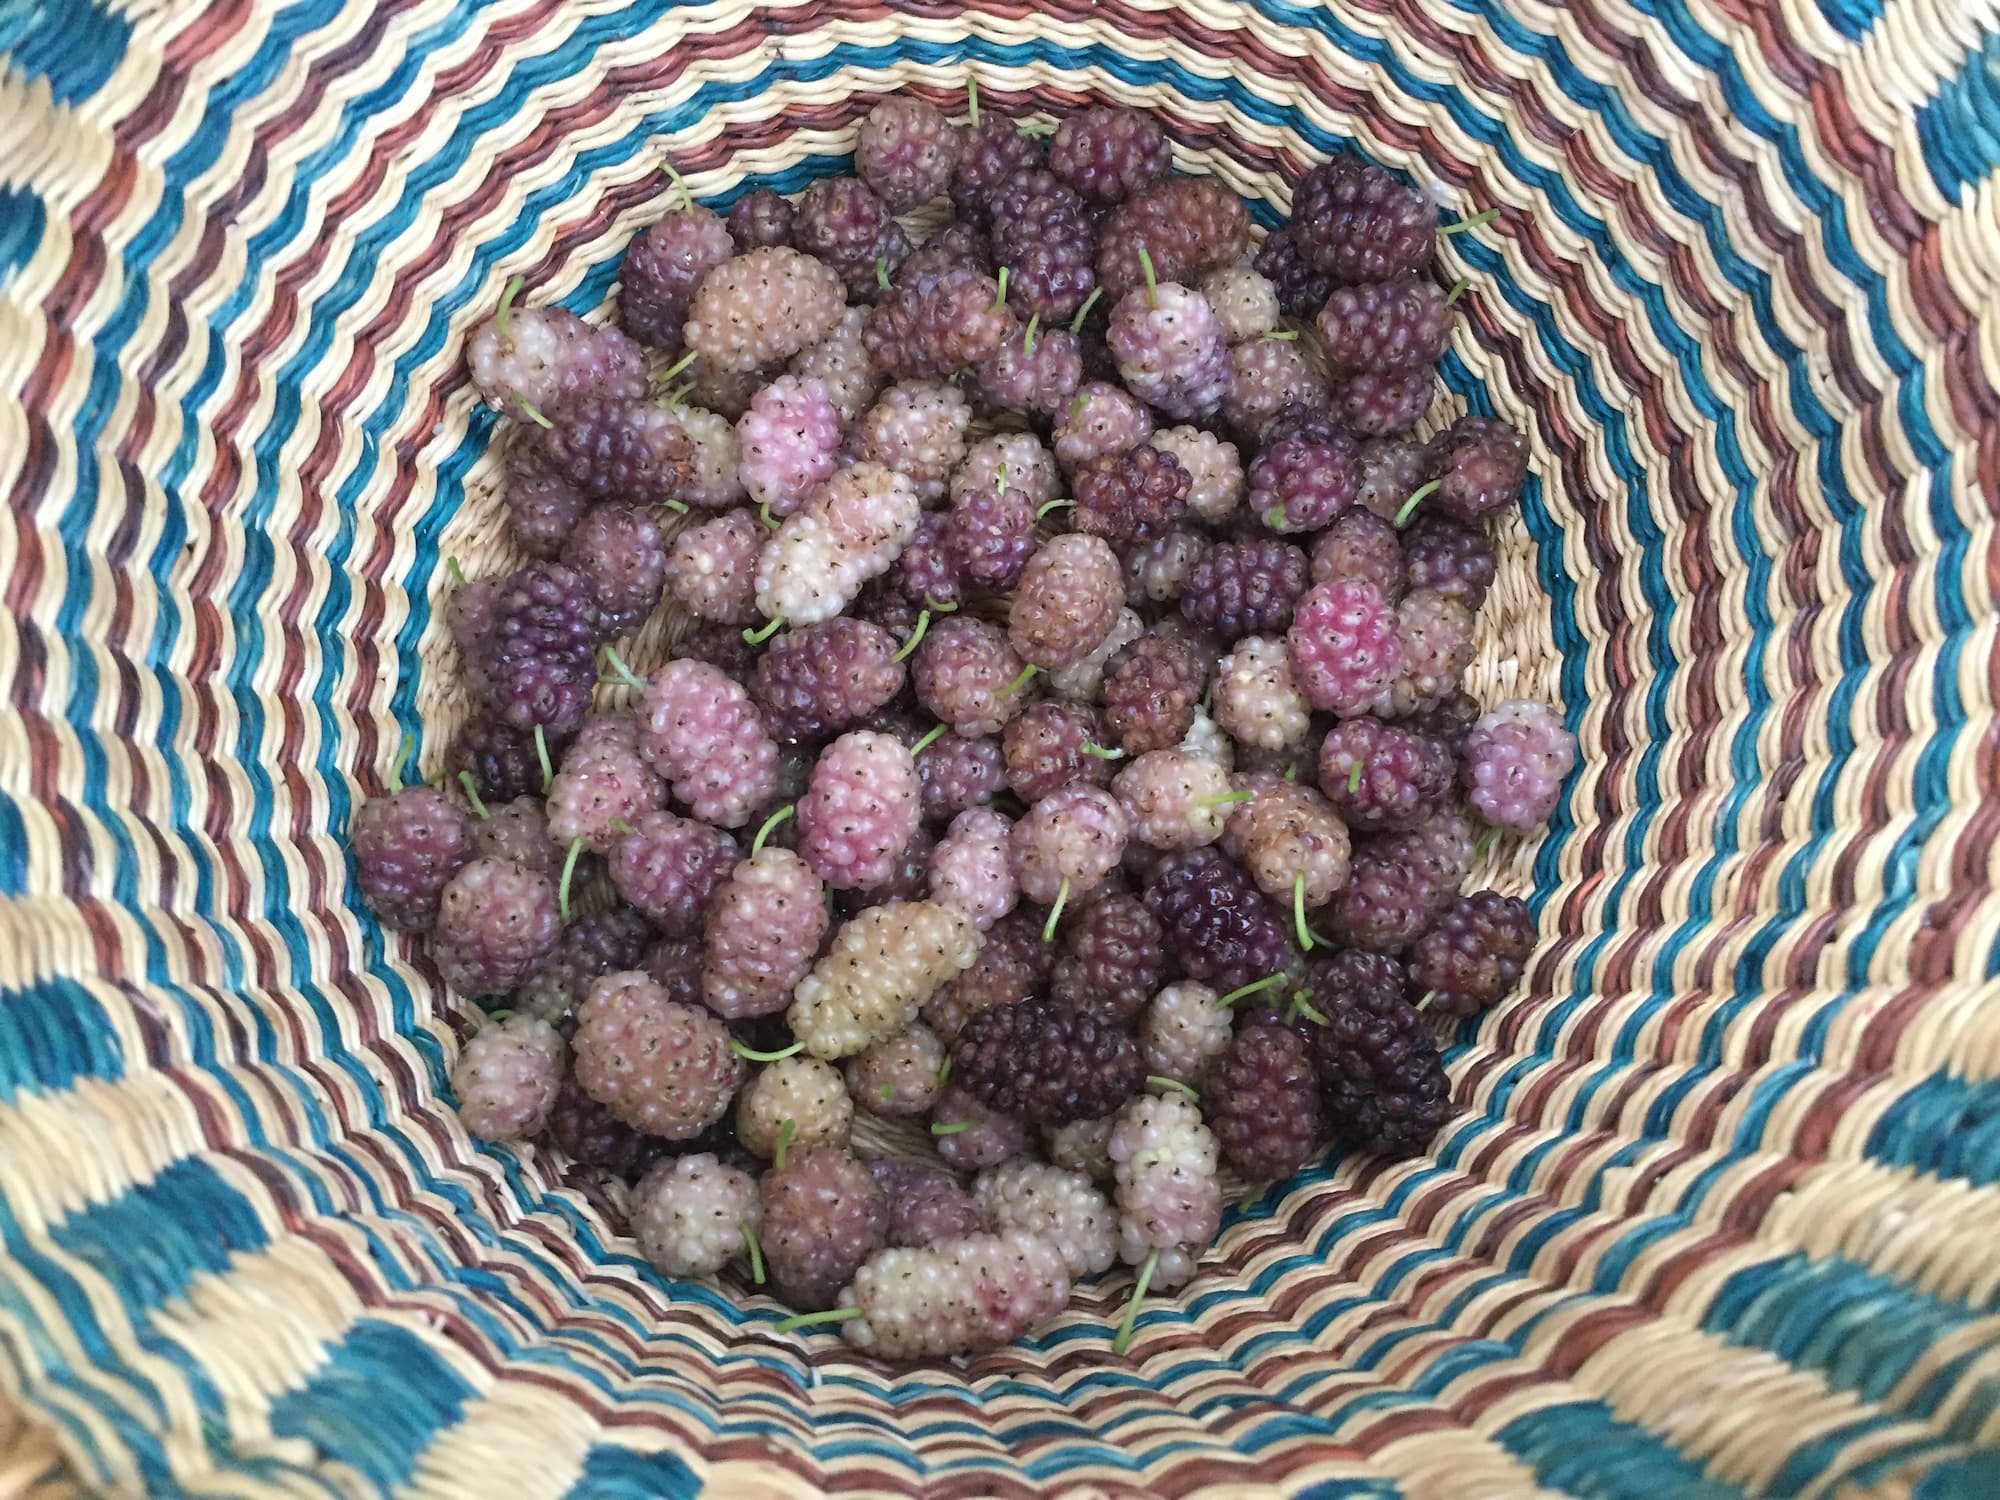 So-called 'white' mulberries often ripen to shades of pink-purple. These berries all came from the same tree.